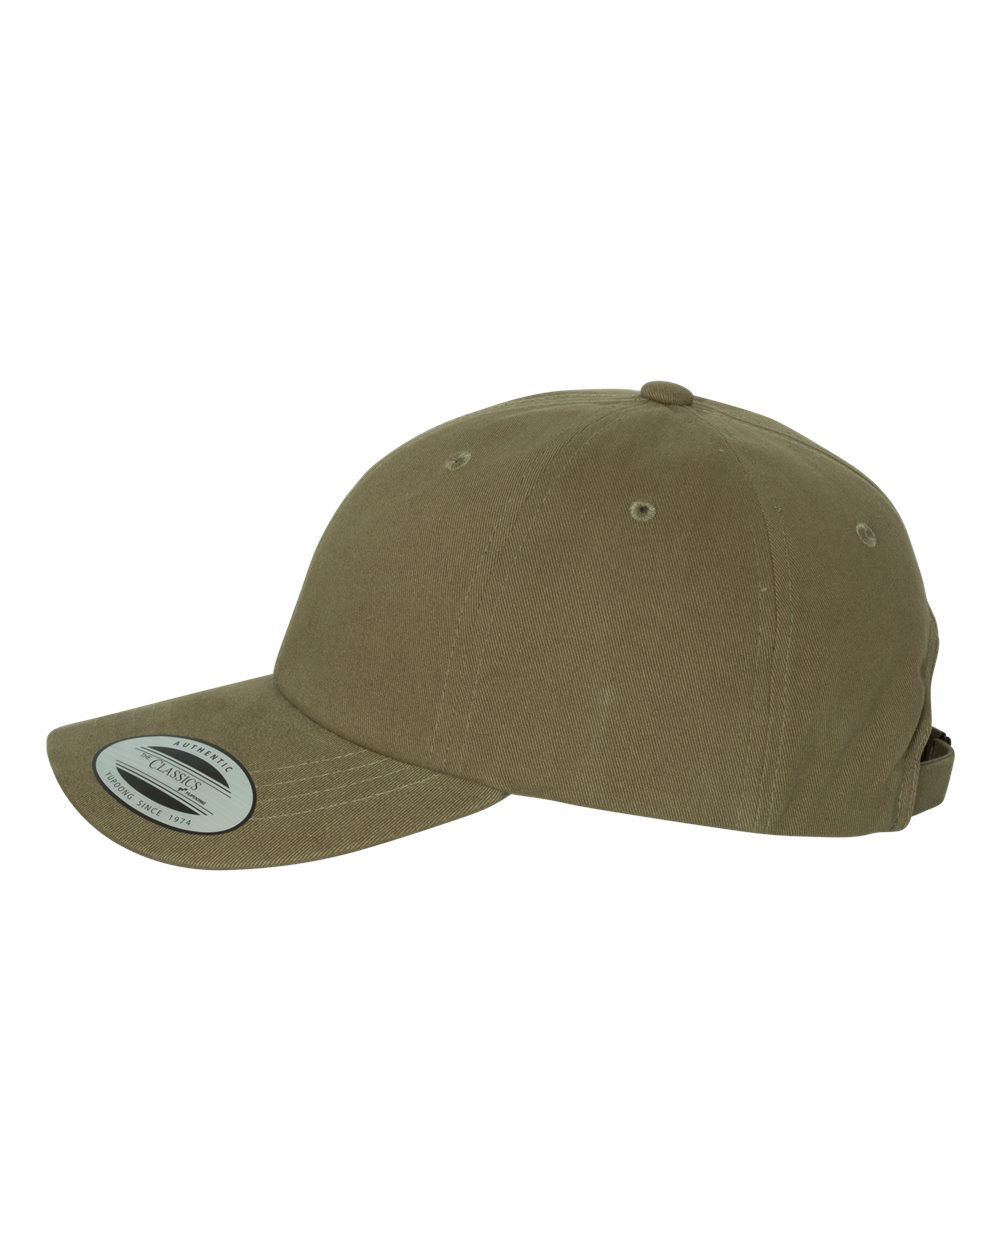 Yupoong 6245PT - Peached Cotton Twill Dad Cap $6.27 - Headwear